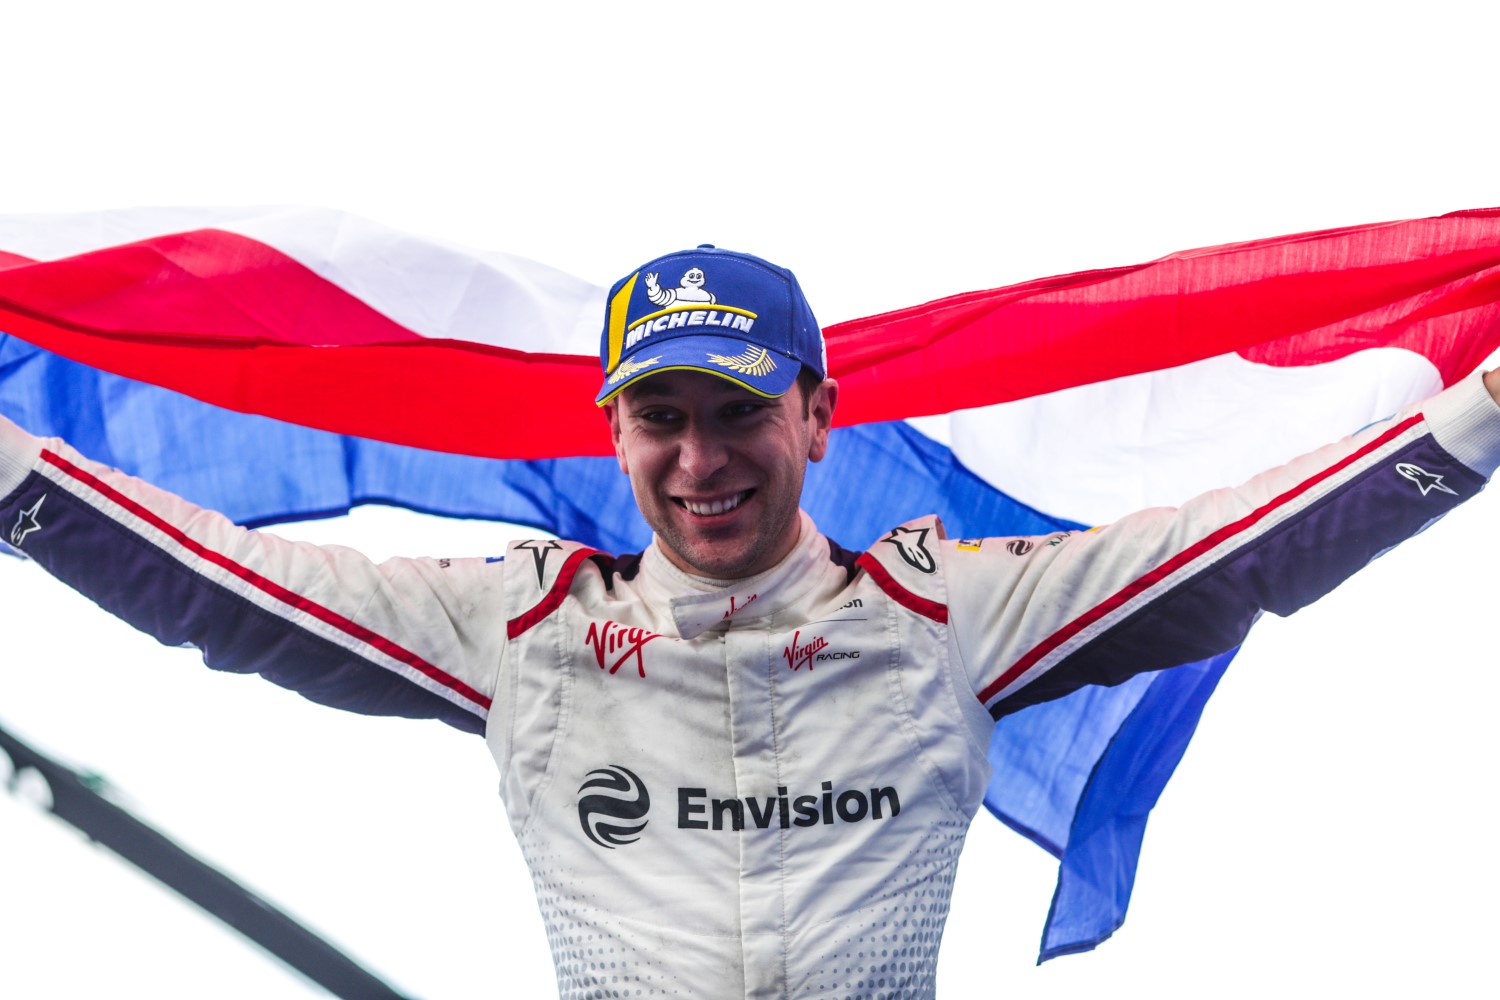 Robin Frijns (NLD), Envision Virgin Racing, 1st position, celebrates his maiden victory on the podium with a flag of the Netherlands during the Paris E-prix at Streets of Paris on April 27, 2019 in Streets of Paris, France. (Photo by Alastair Staley / LAT Images)